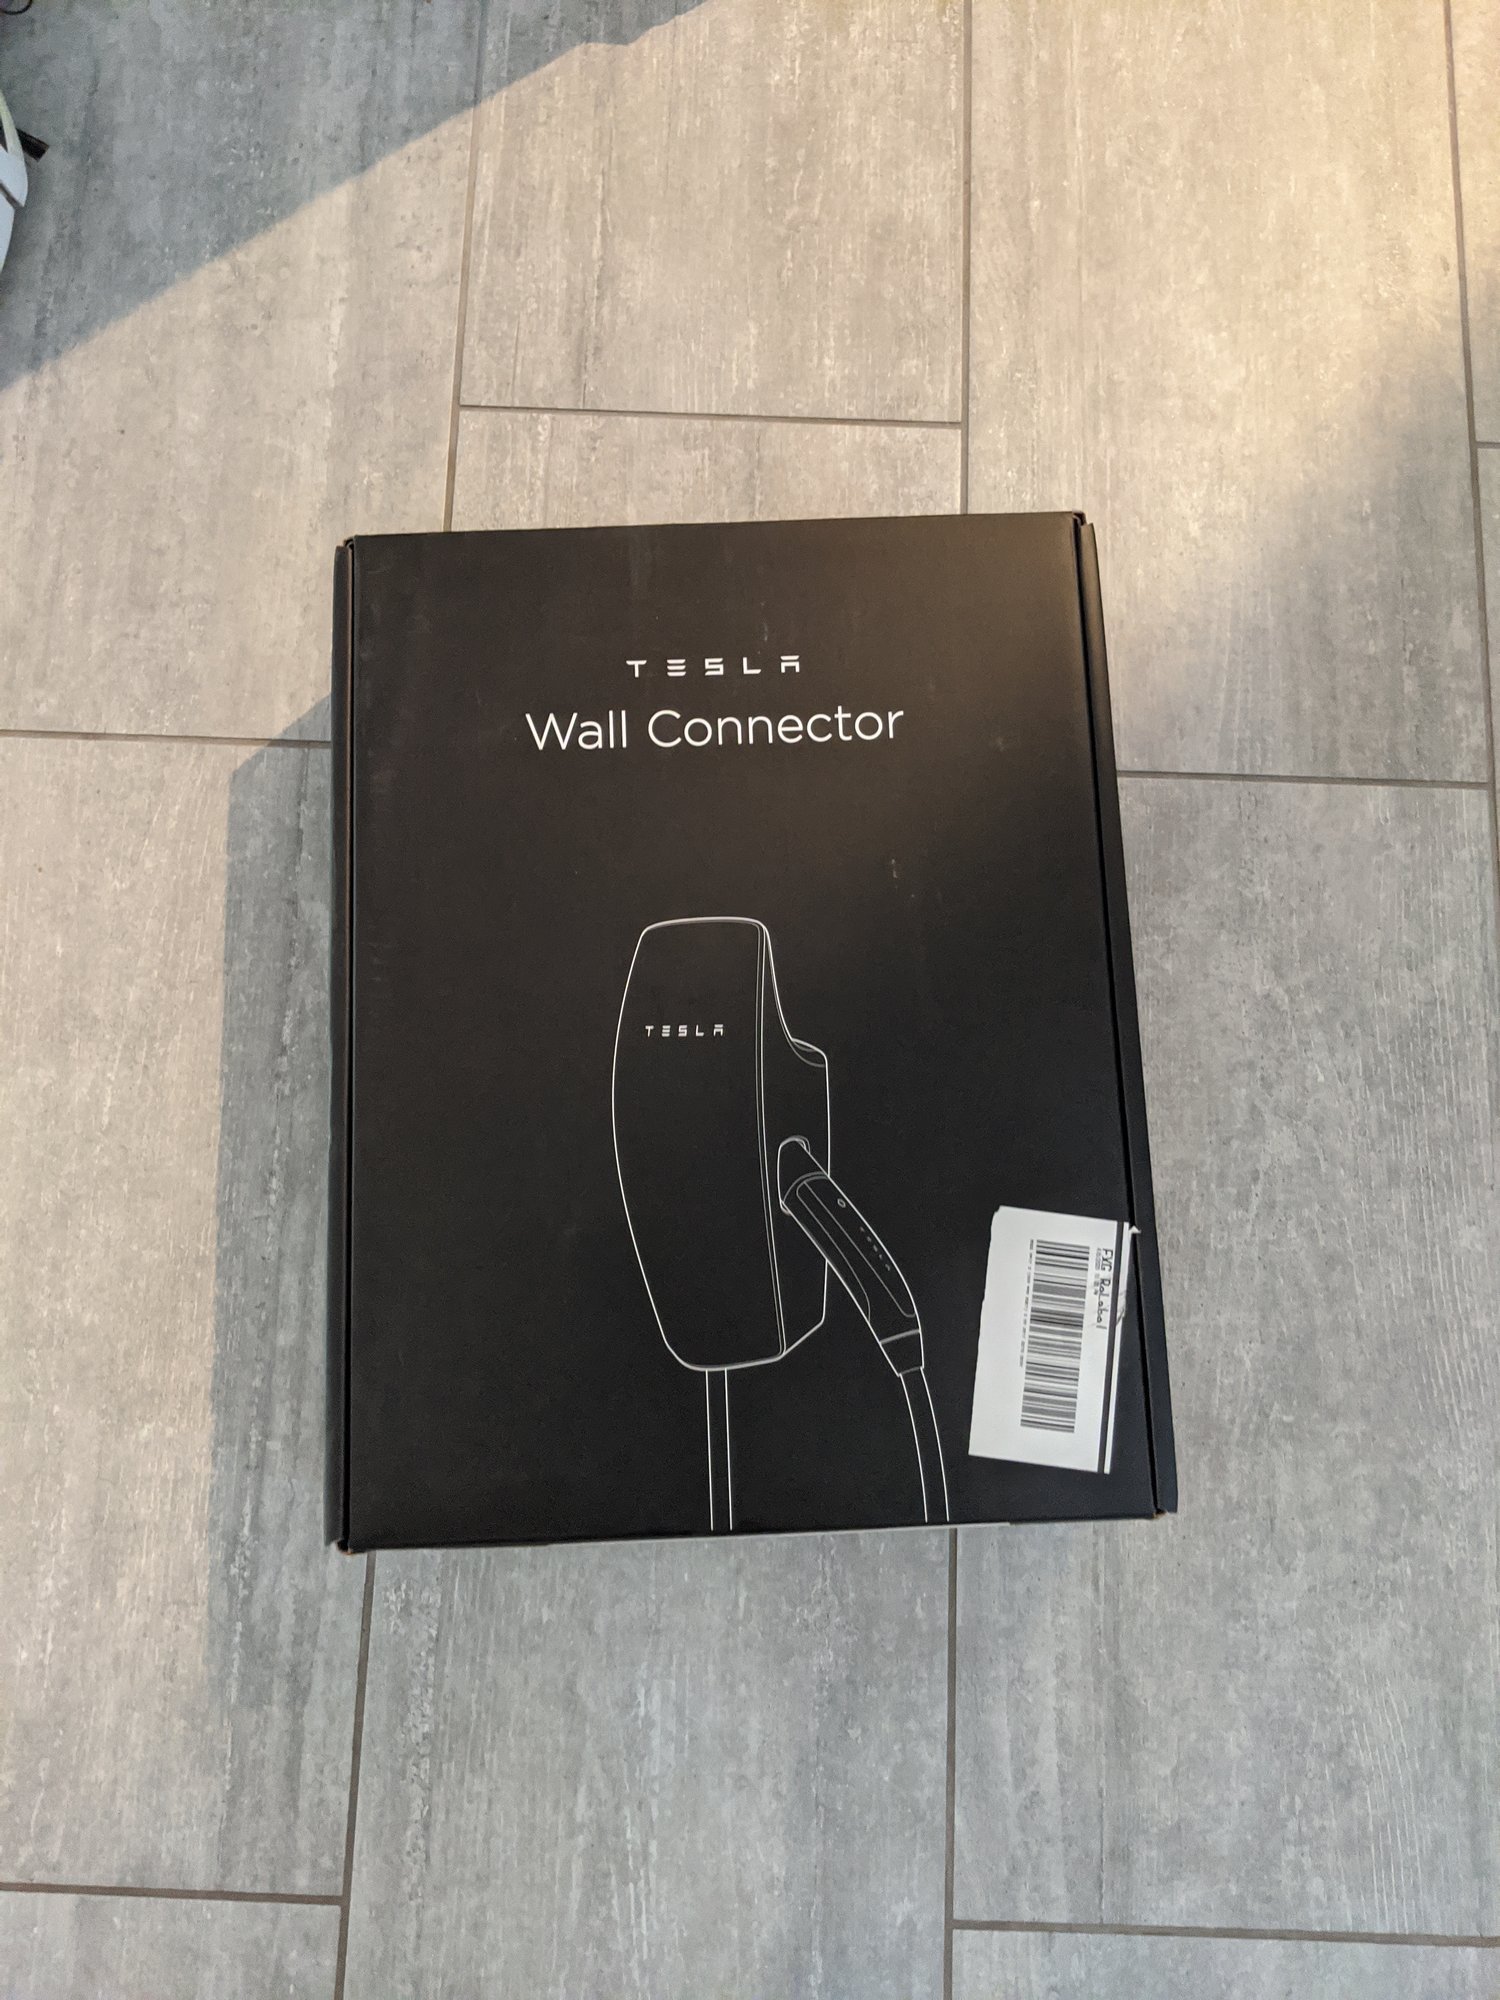 Tesla Wall Charger, how to tell the difference between Gen 2 vs Gen 3?